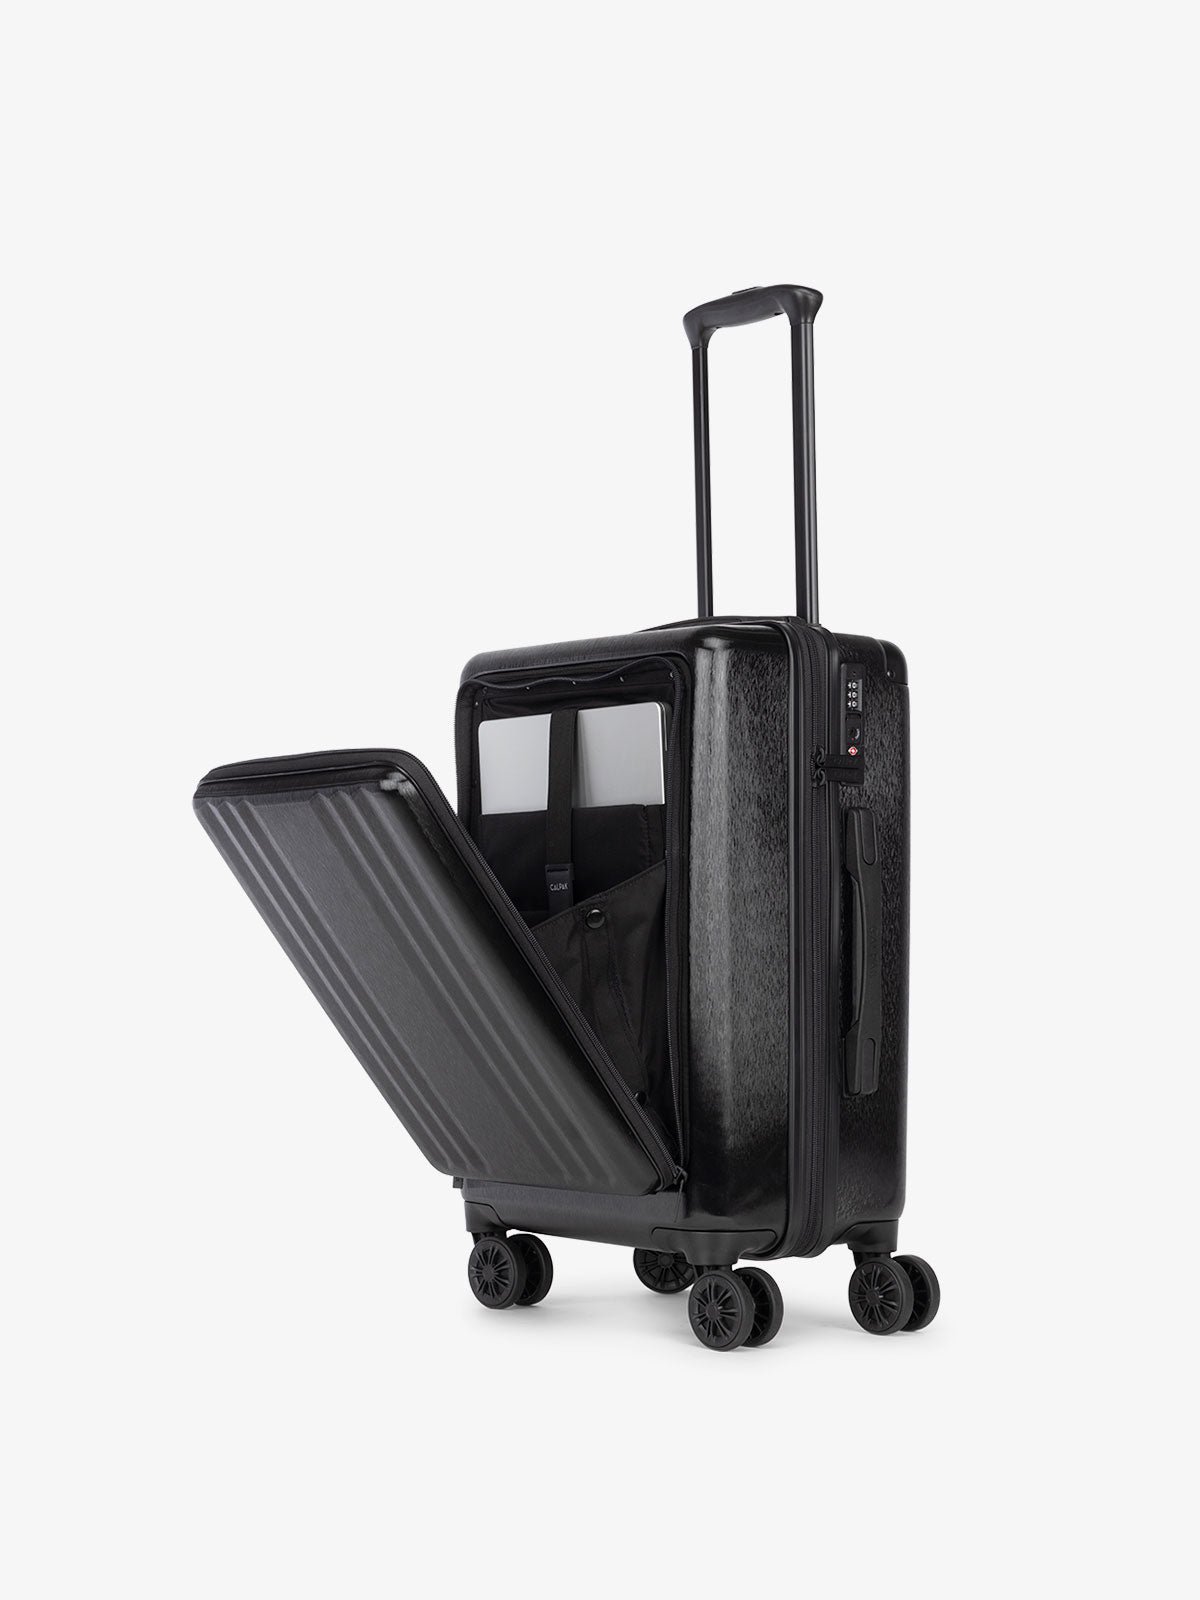 CALPAK Ambeur front pocket lightweight carry-on luggage in black